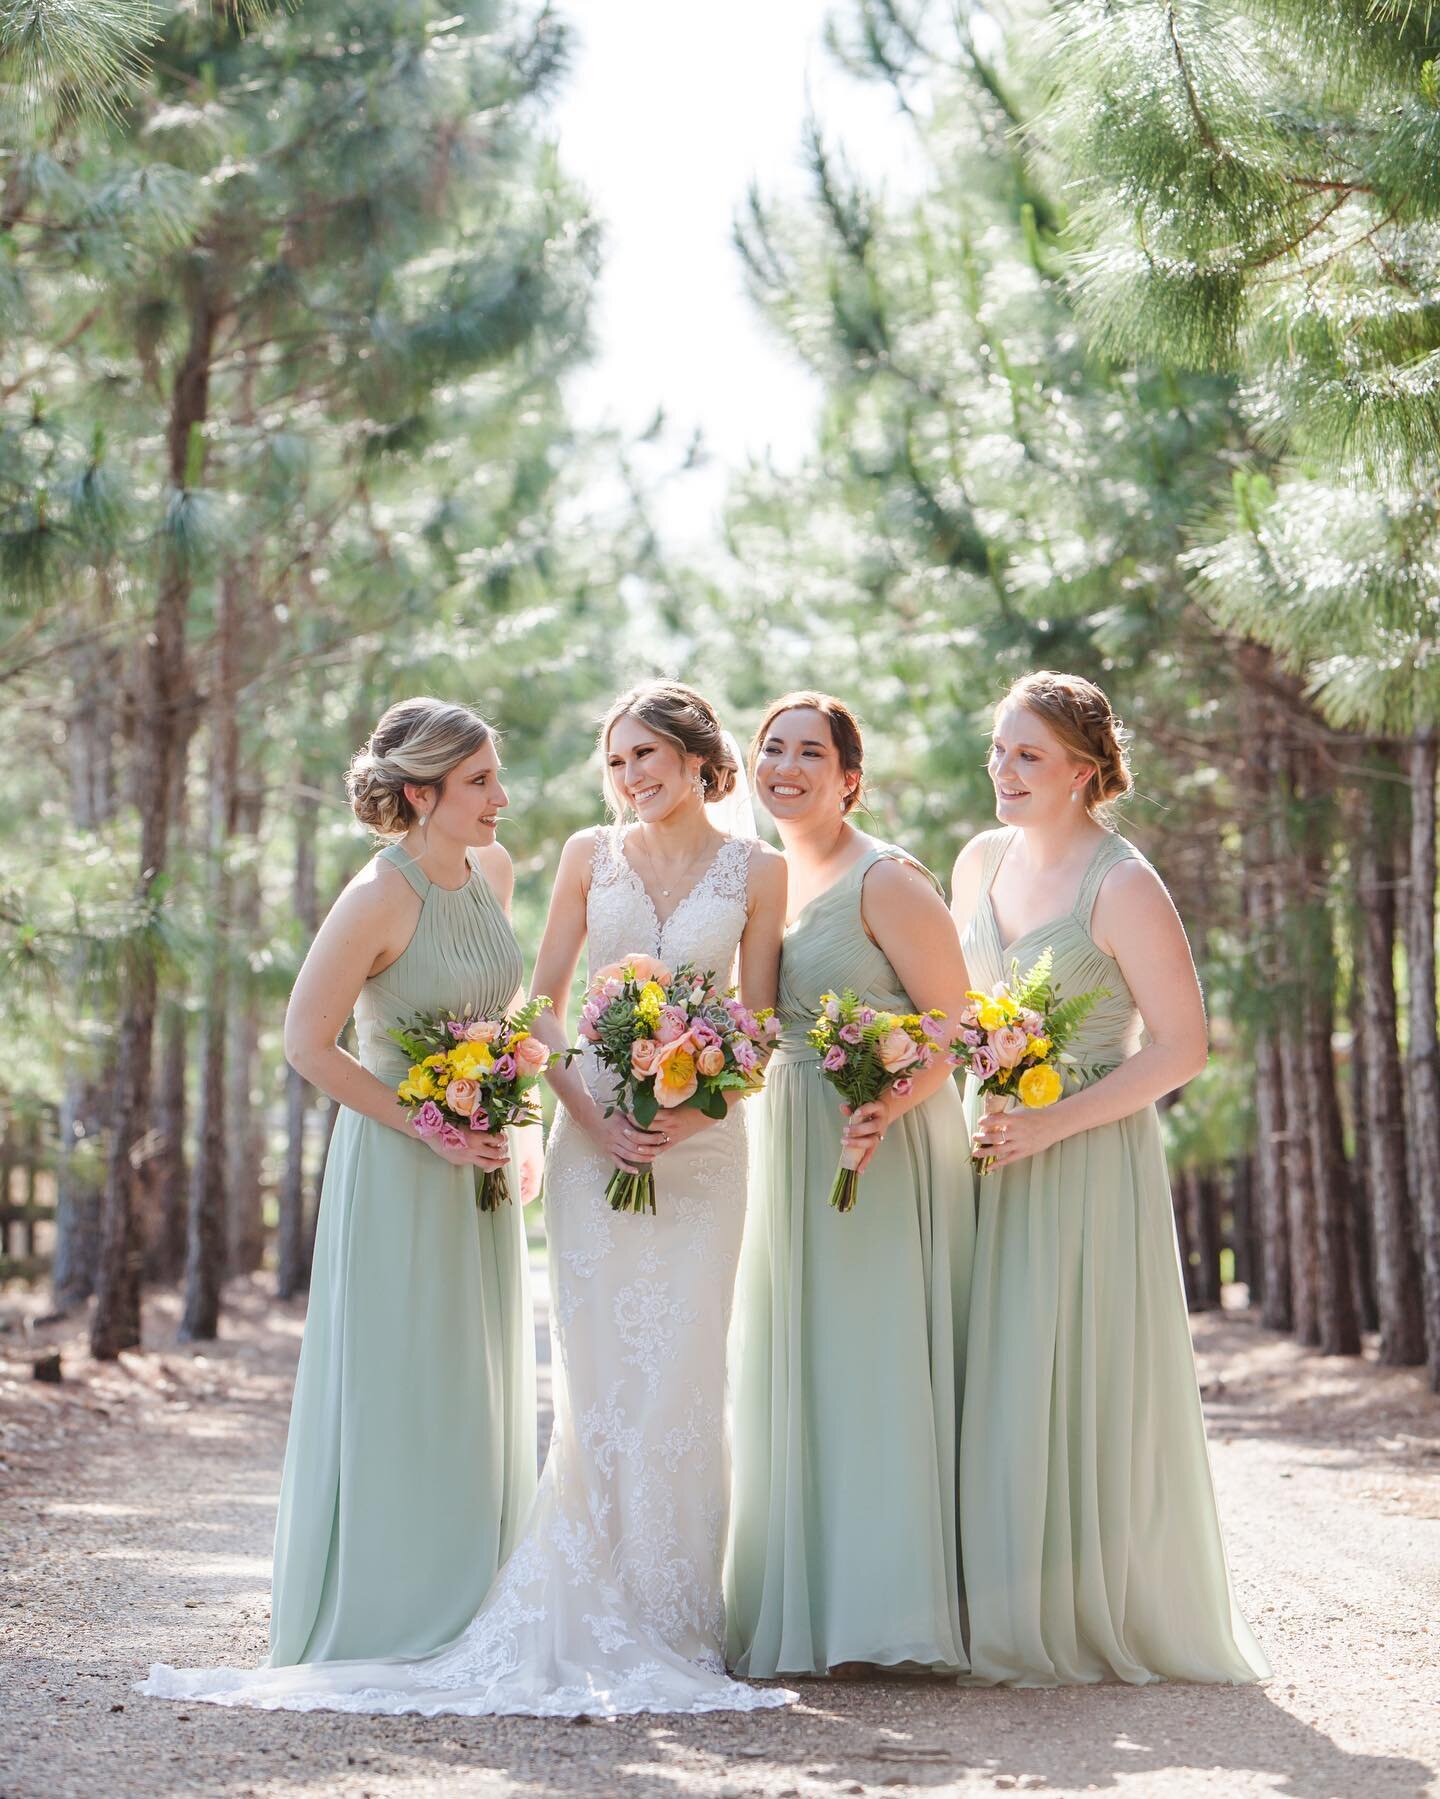 Watching the bond between this bride and her beautiful bridesmaids was a true highlight of the day 💕 So glad to have captured these memories for them to cherish forever! #weddingphotography #bridesmaids #bridetribe